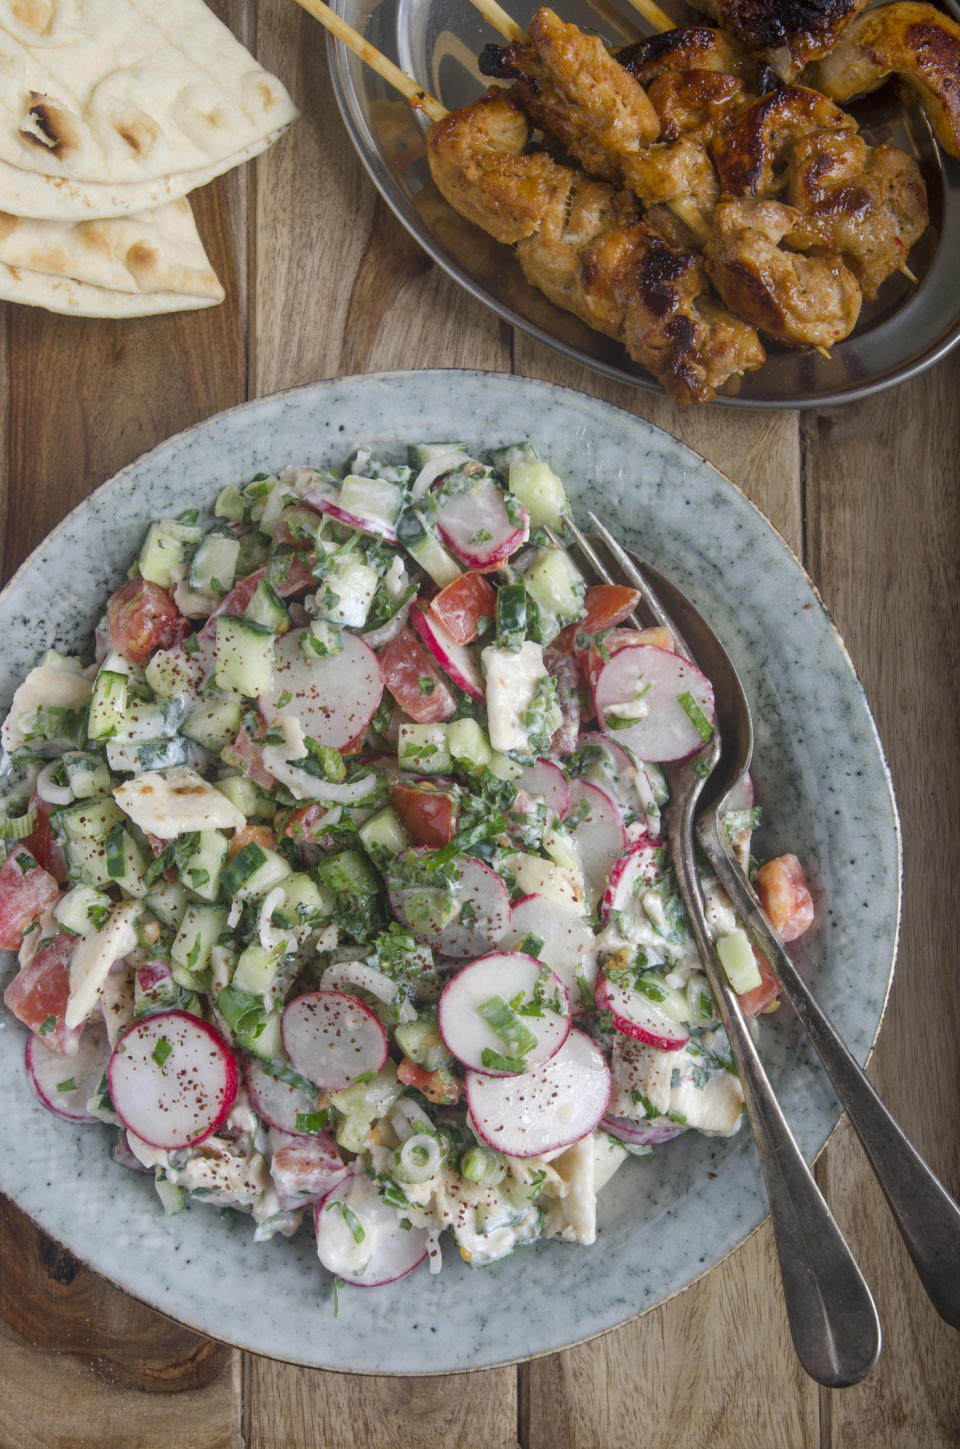 Grilled chicken skewers with fattoush salad